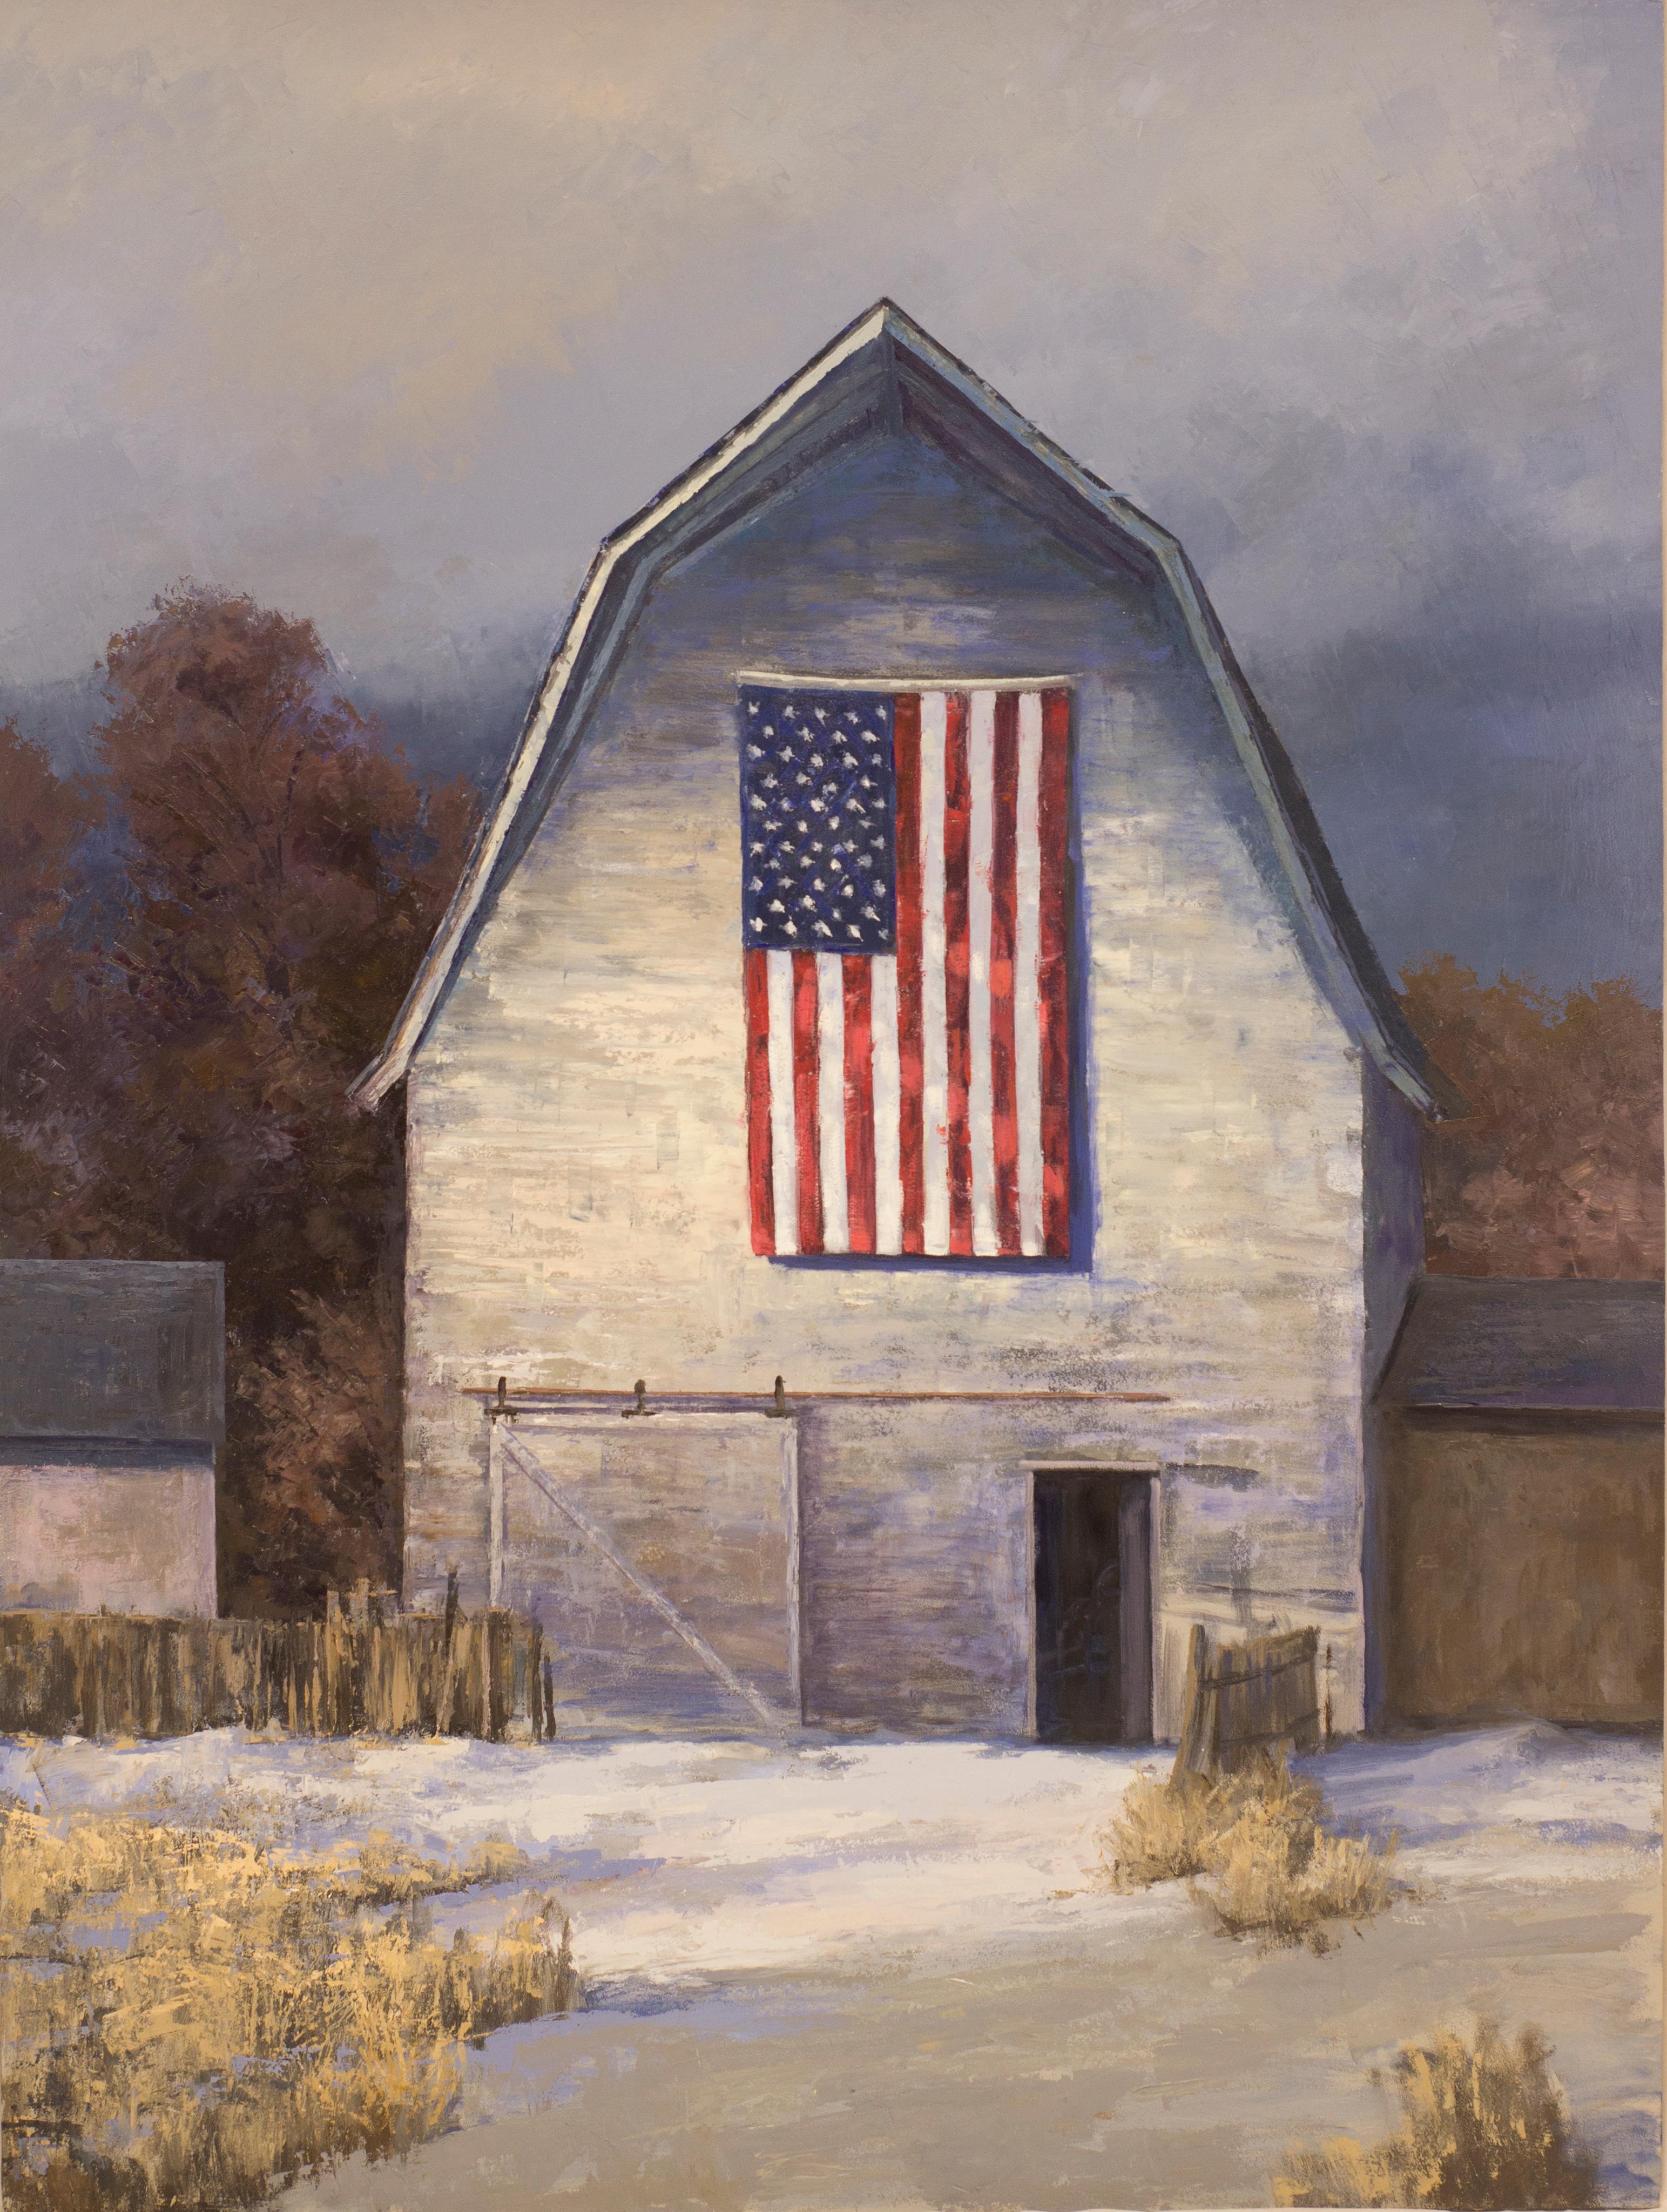 Simon Winegar Landscape Painting - With Hope in a New Year (American flag, weathered hay barn, moody sky)